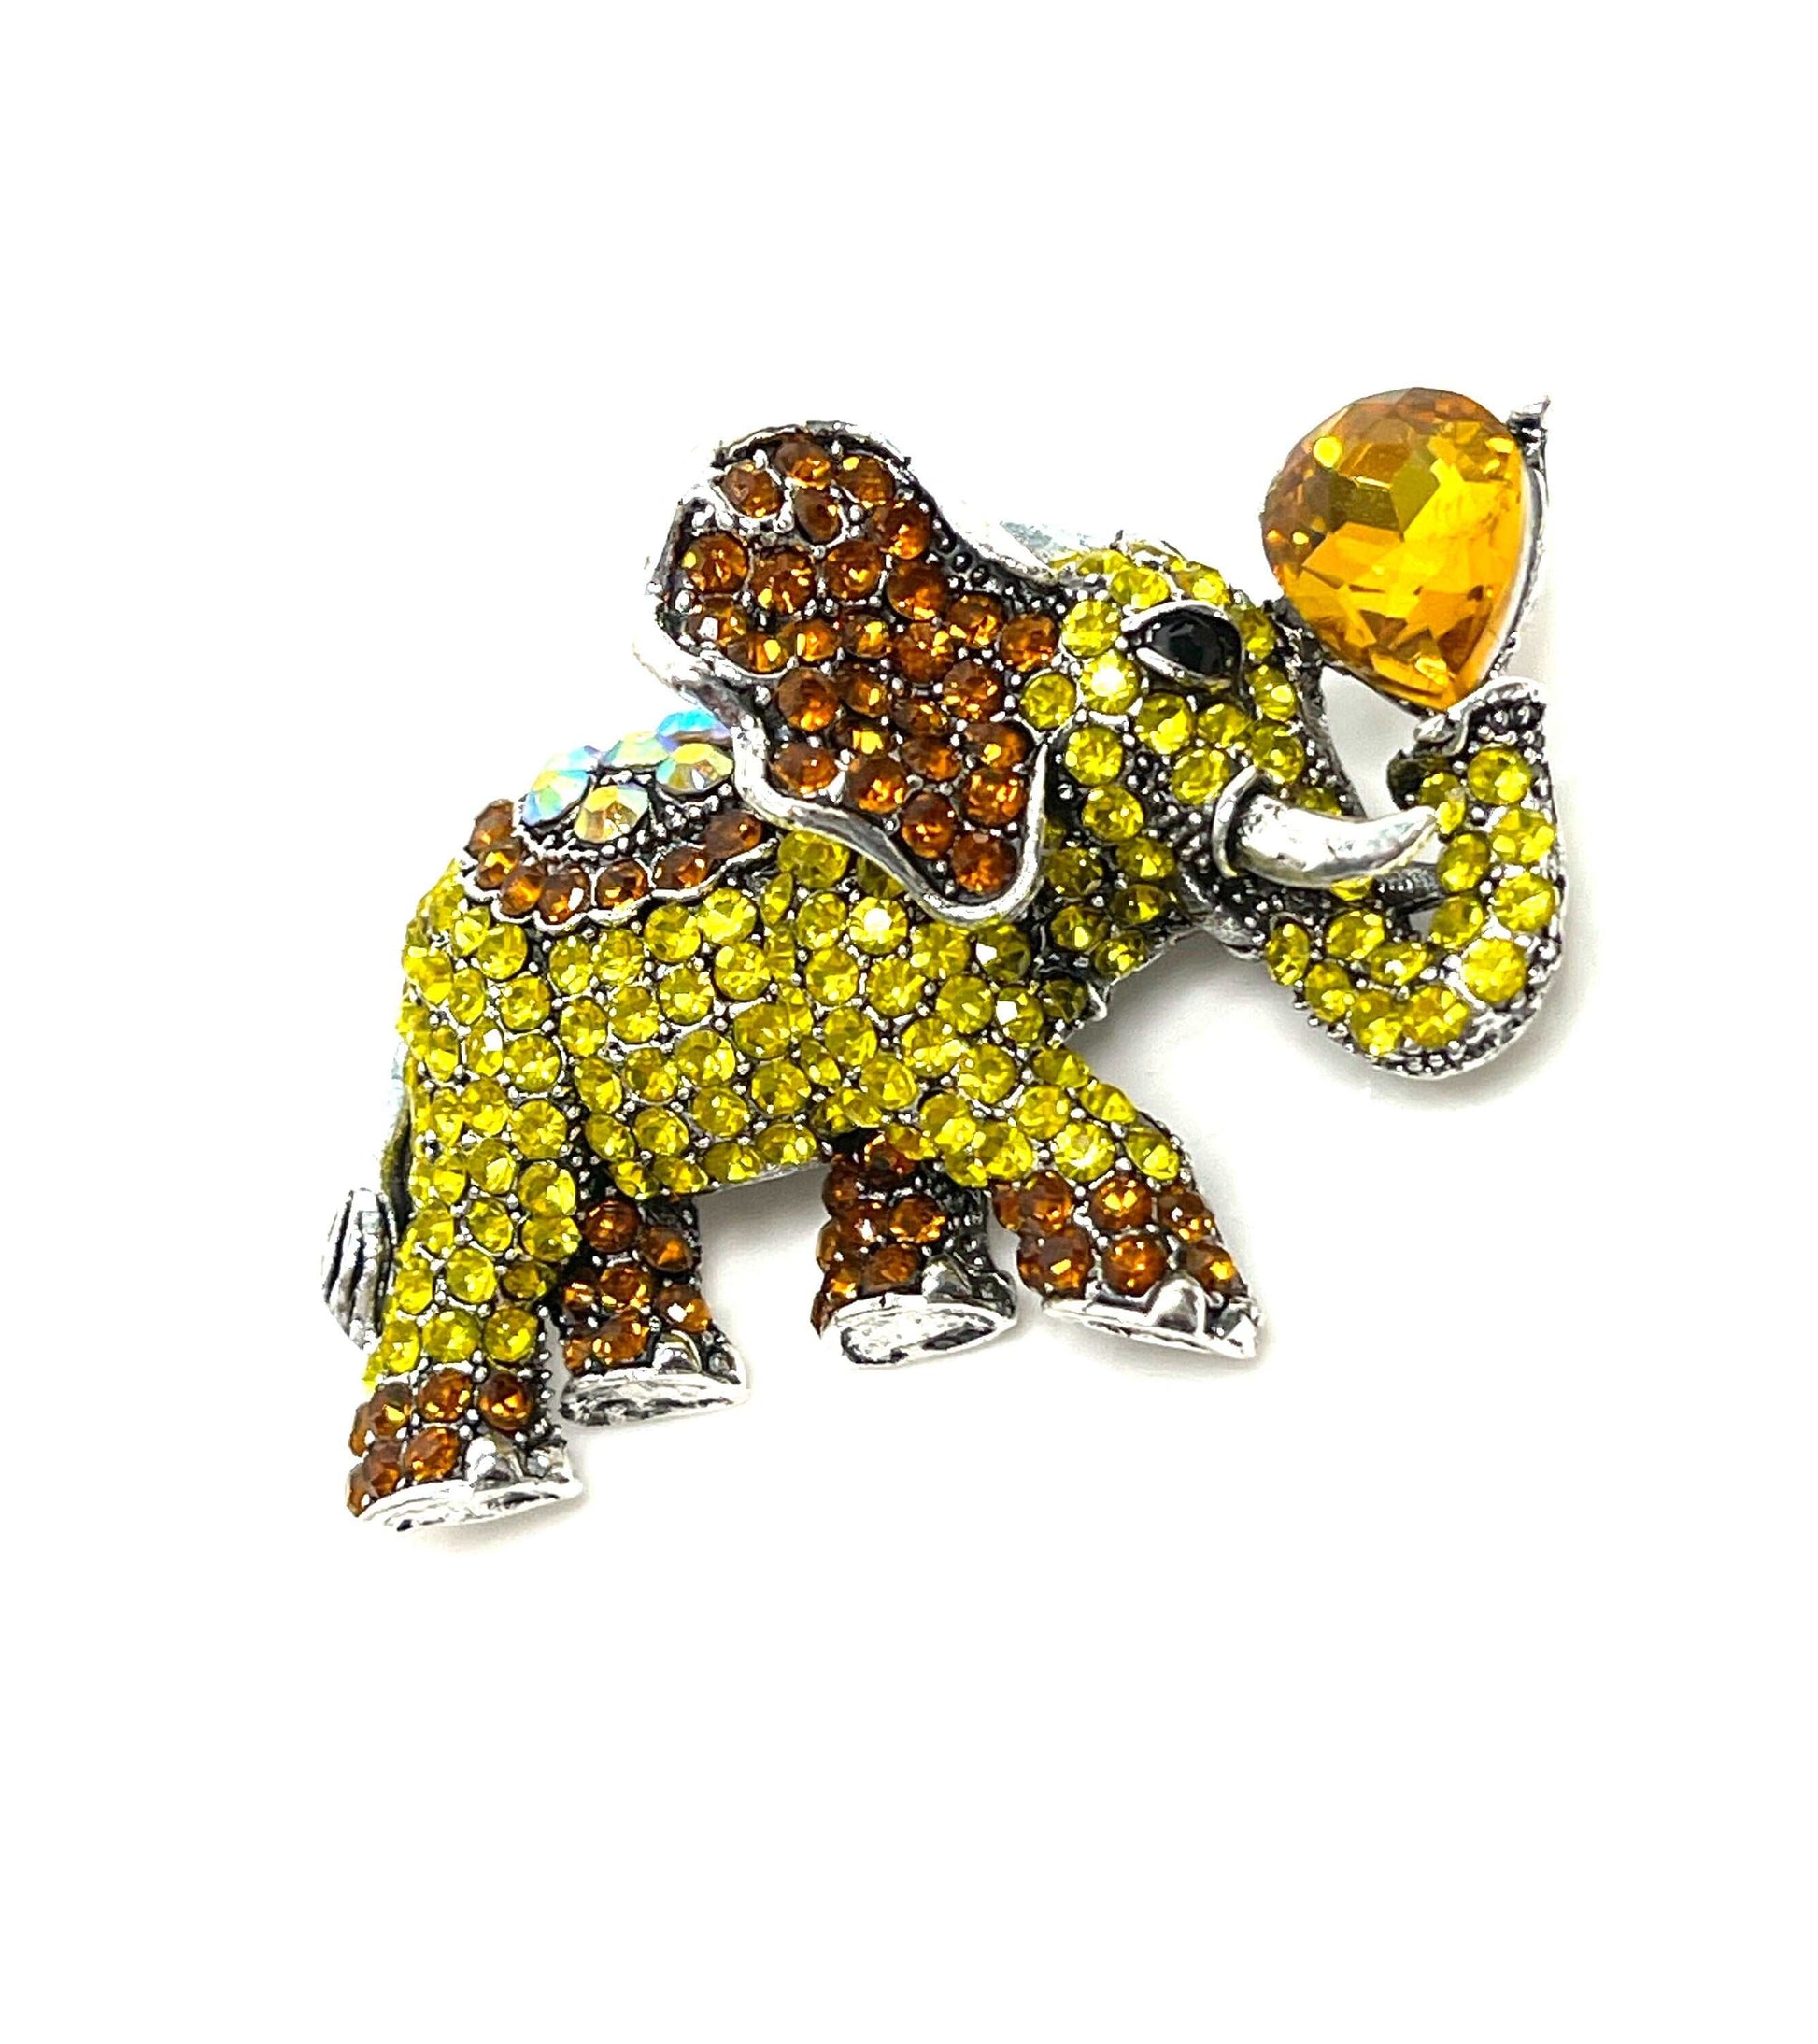 Large Yellow Indian Elephant Brooch, Sparkly Elephant Pin, Crystal Animal Pin, Multi Crystal Diamonte Pin, Brooches For Women